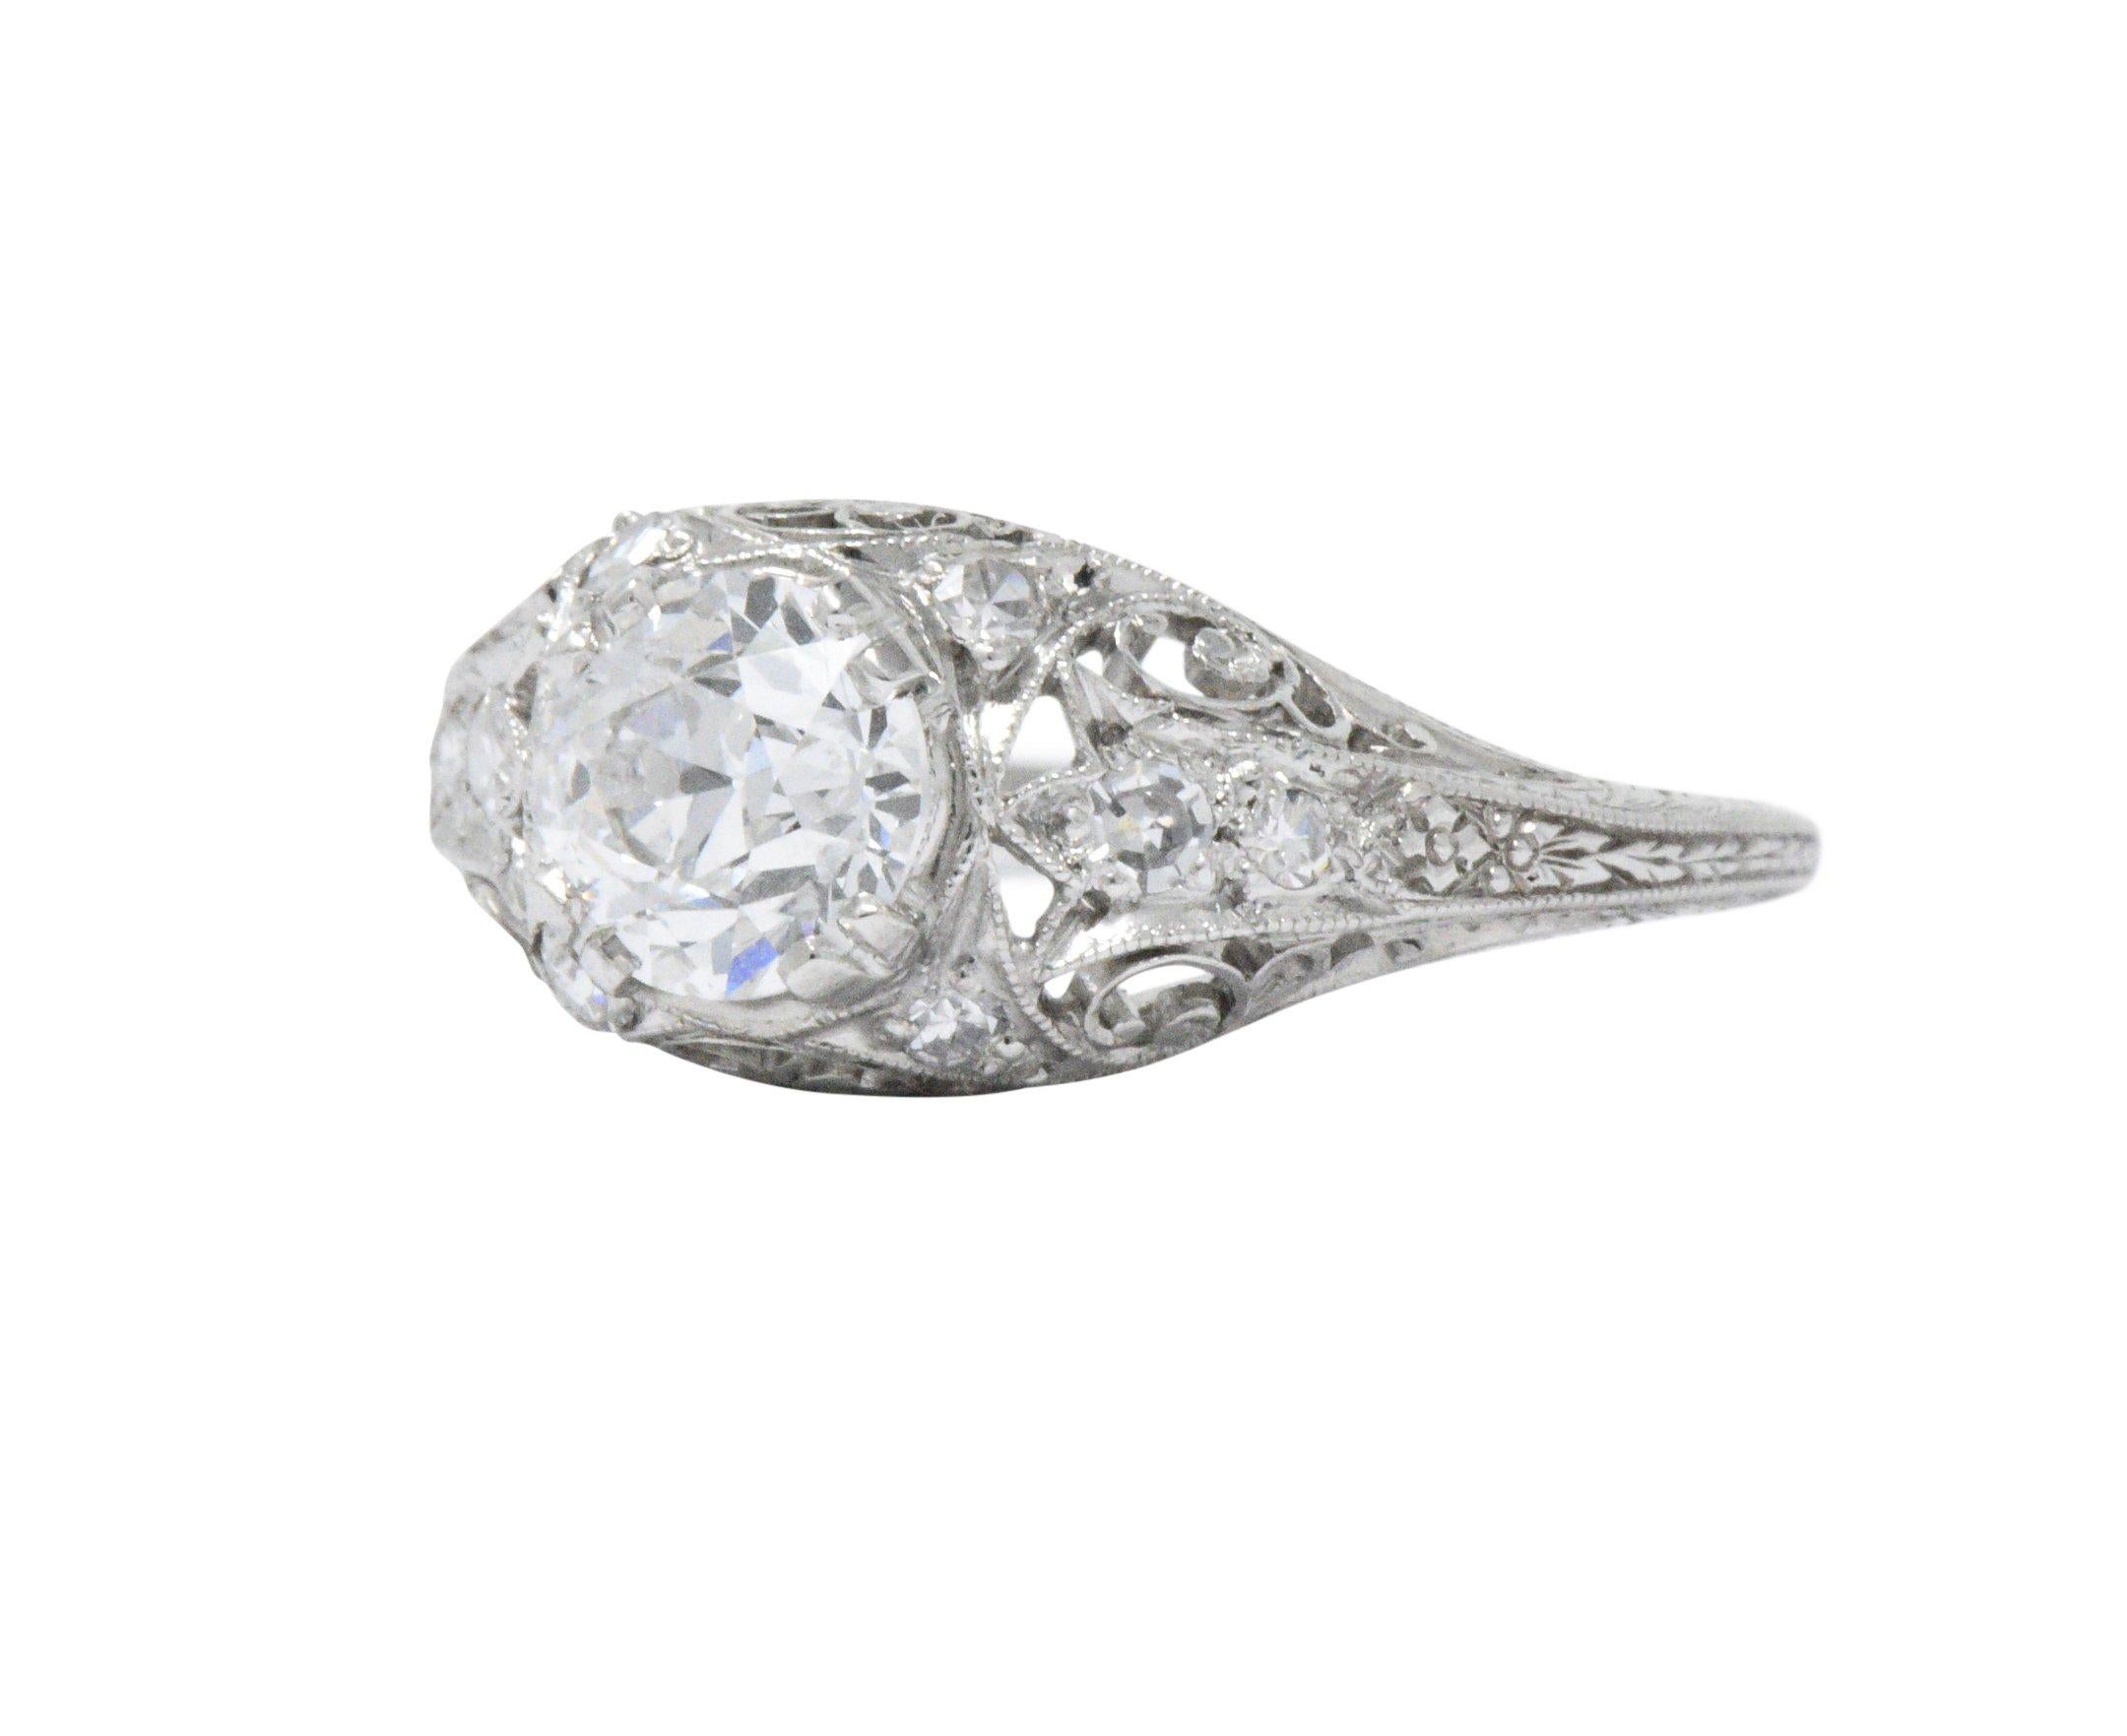 Gorgeous late Art Deco platinum engagement ring centering a 1.01 carat old European cut diamond, E in color and VS2 in clarity

Mount decorated with swirl and floral design accented with .20 carat total weight of single cut diamonds

Top measures